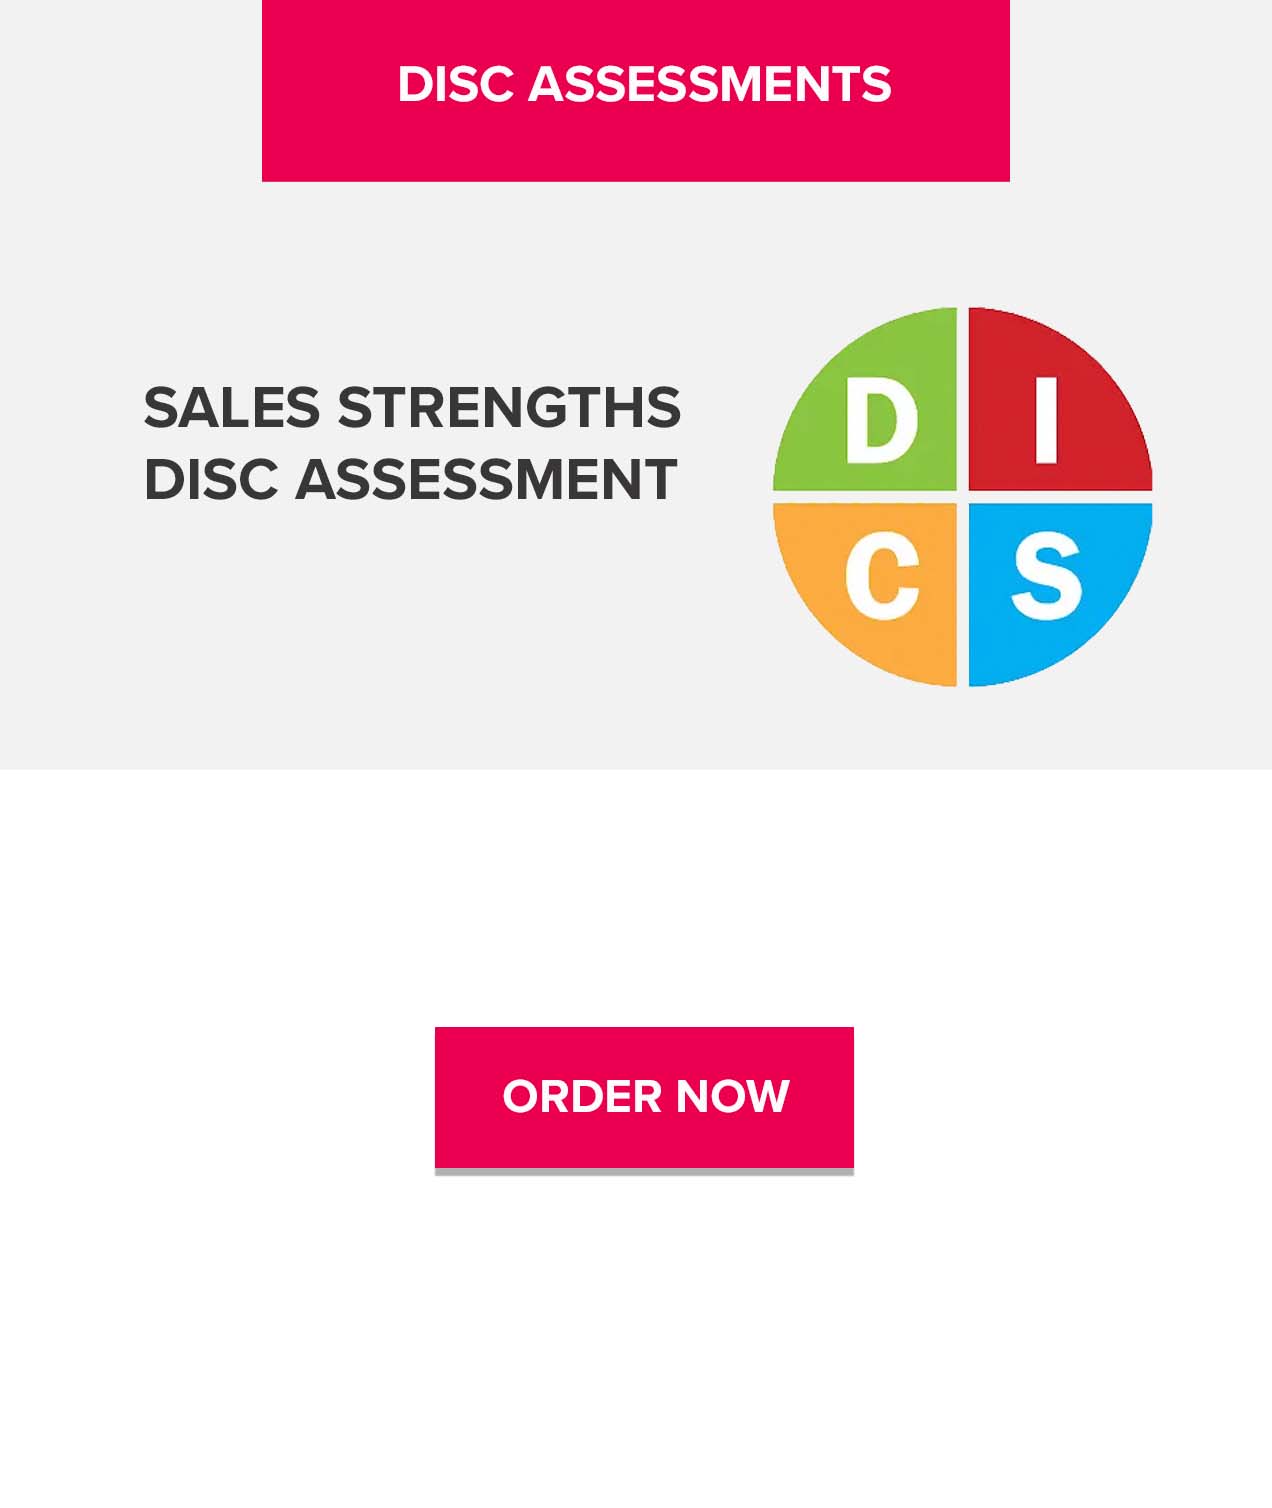 DISC Assessments to find your strengths as a sales-person